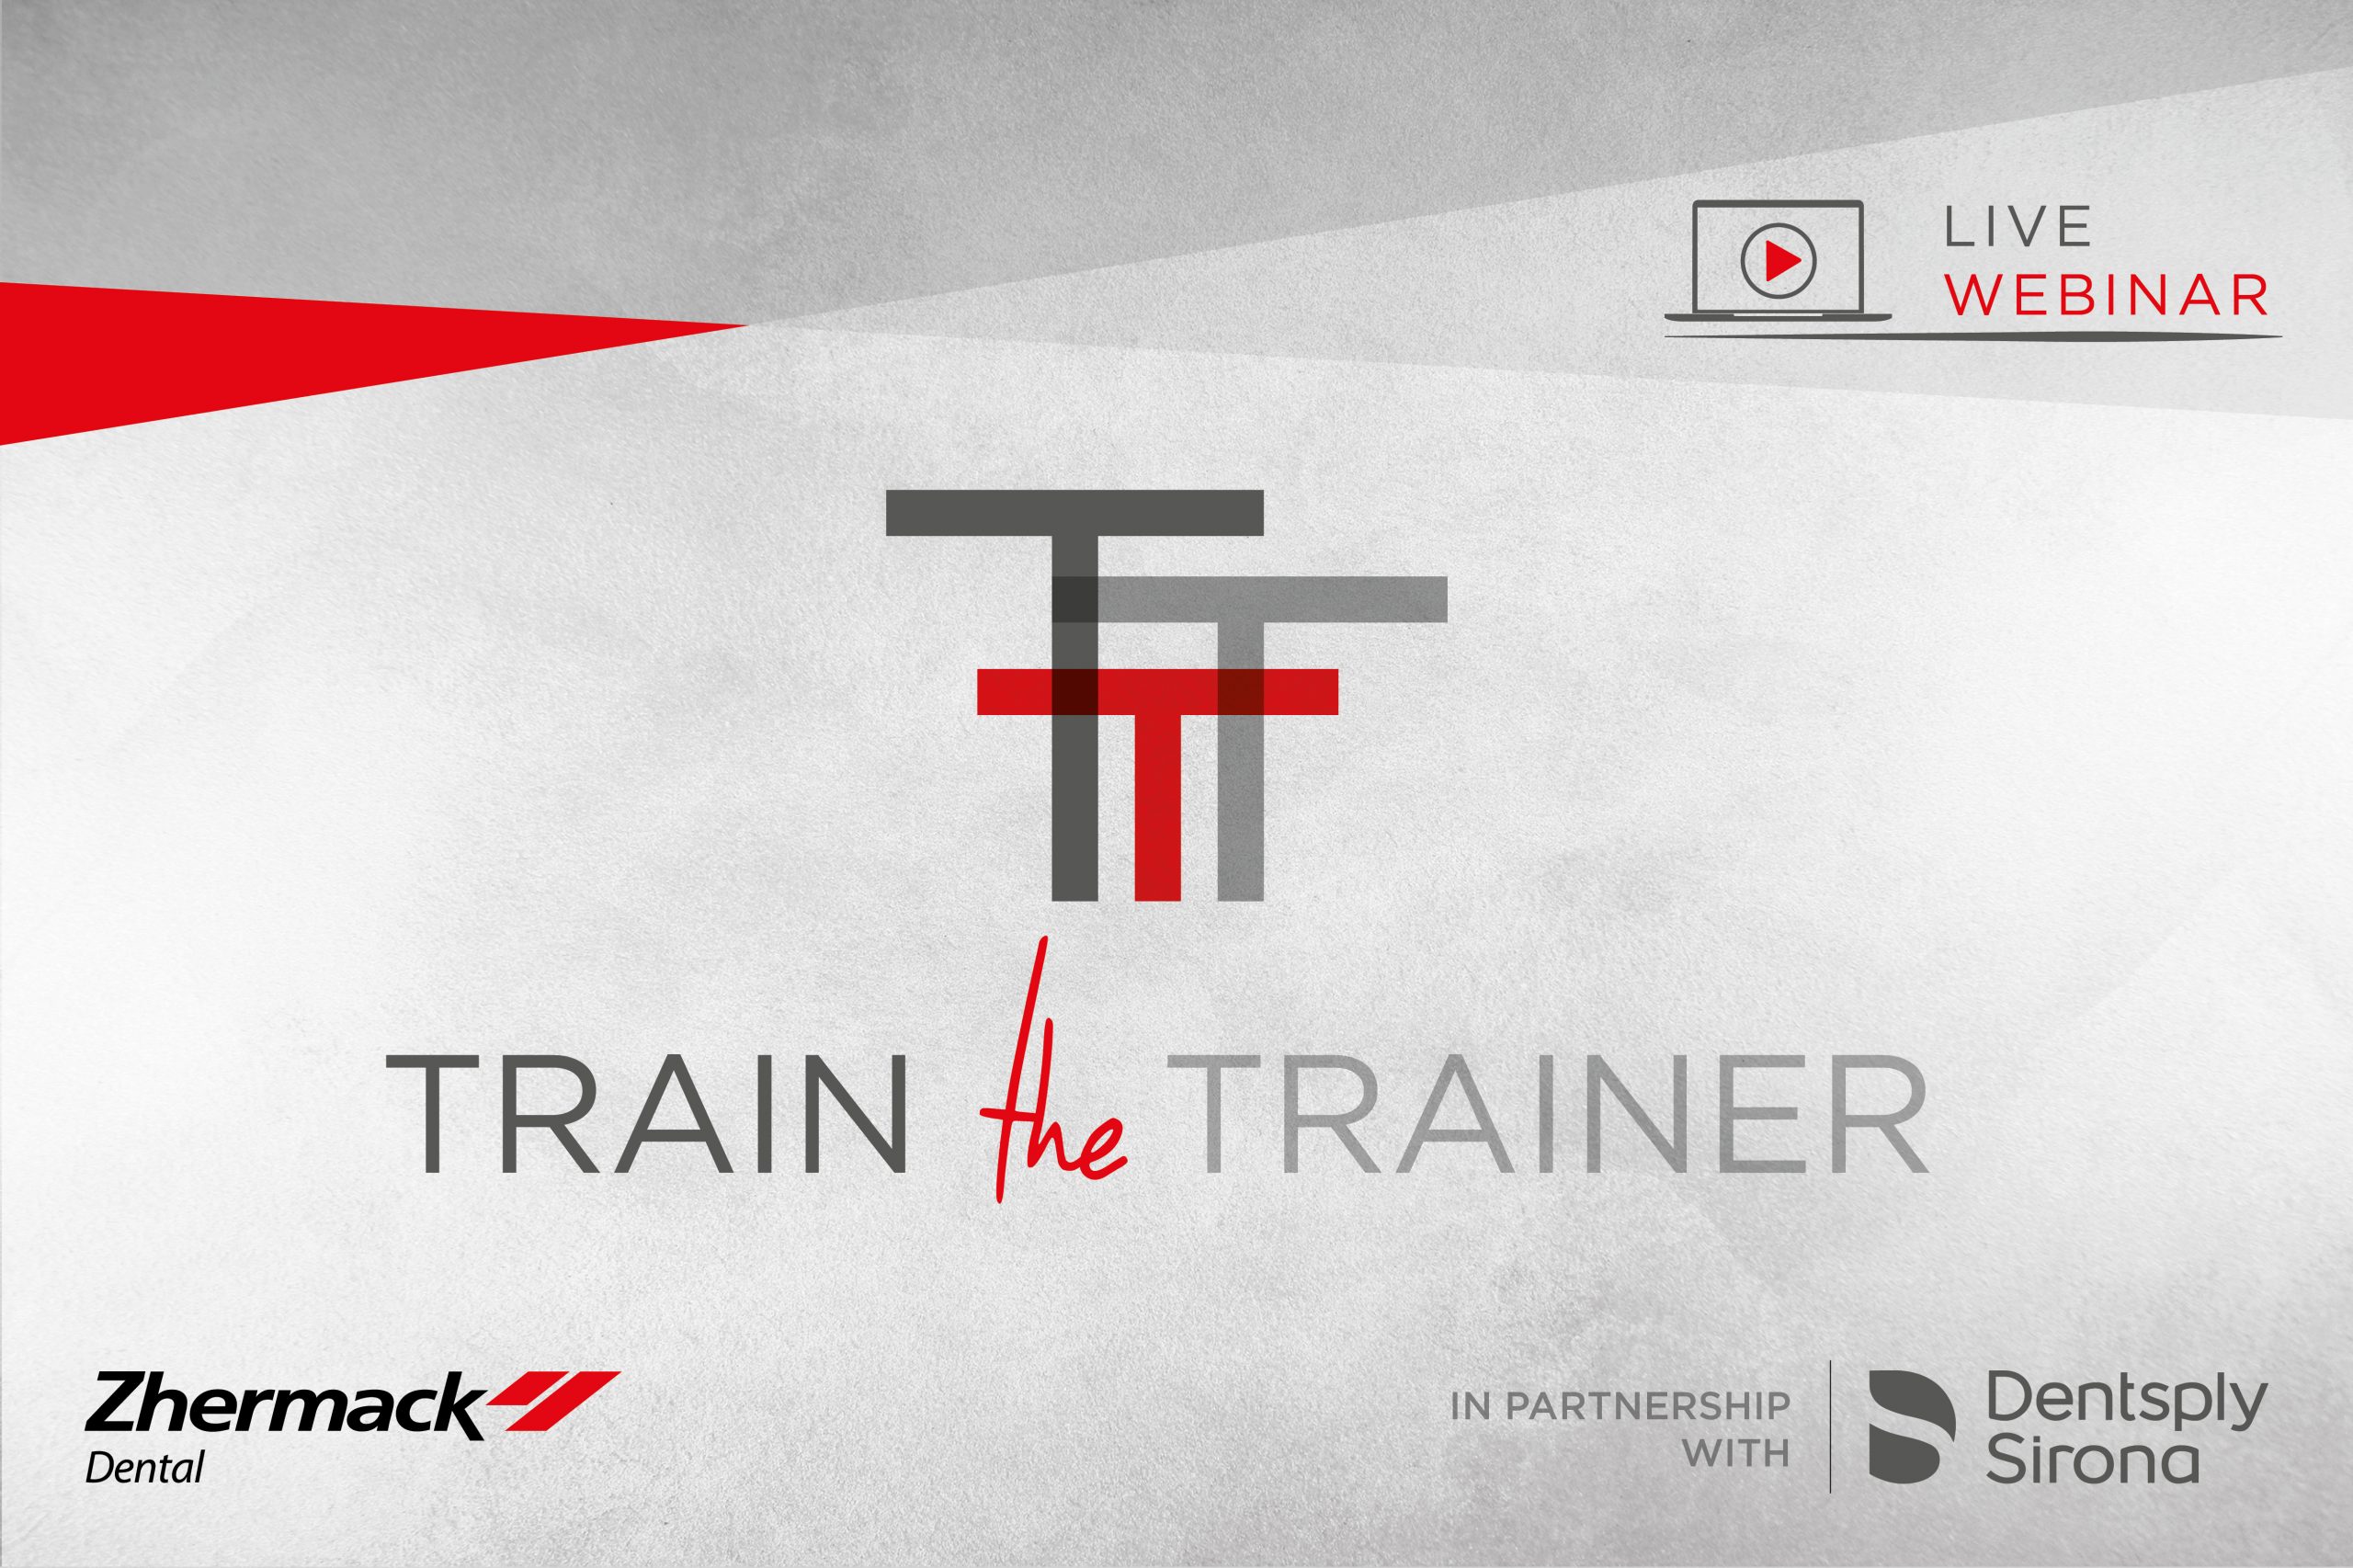 2021 Zhermack event Train The Trainer